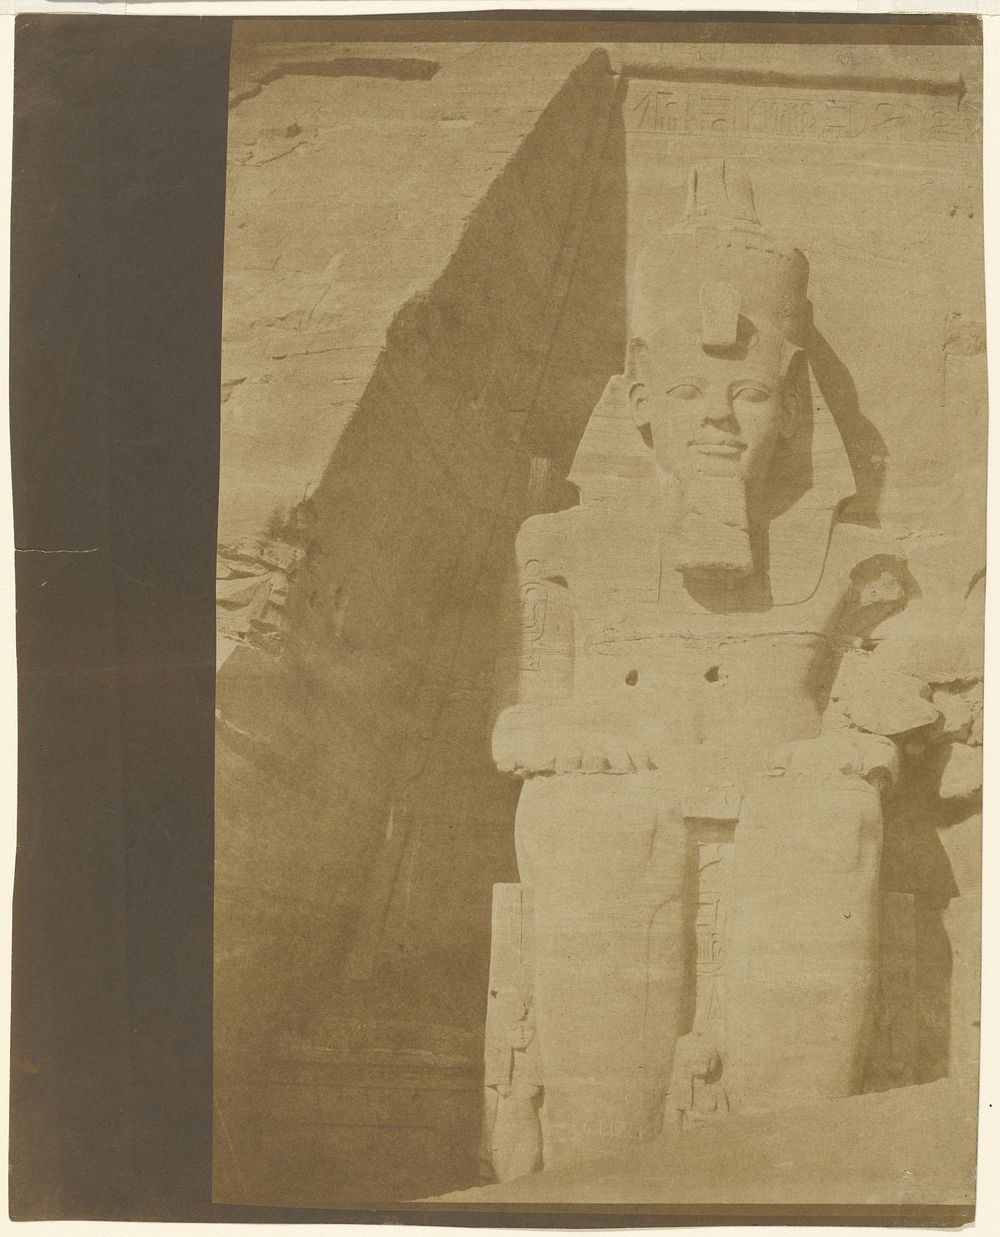 Colossus of Great Temple, Abu Simbel by V G Maunier